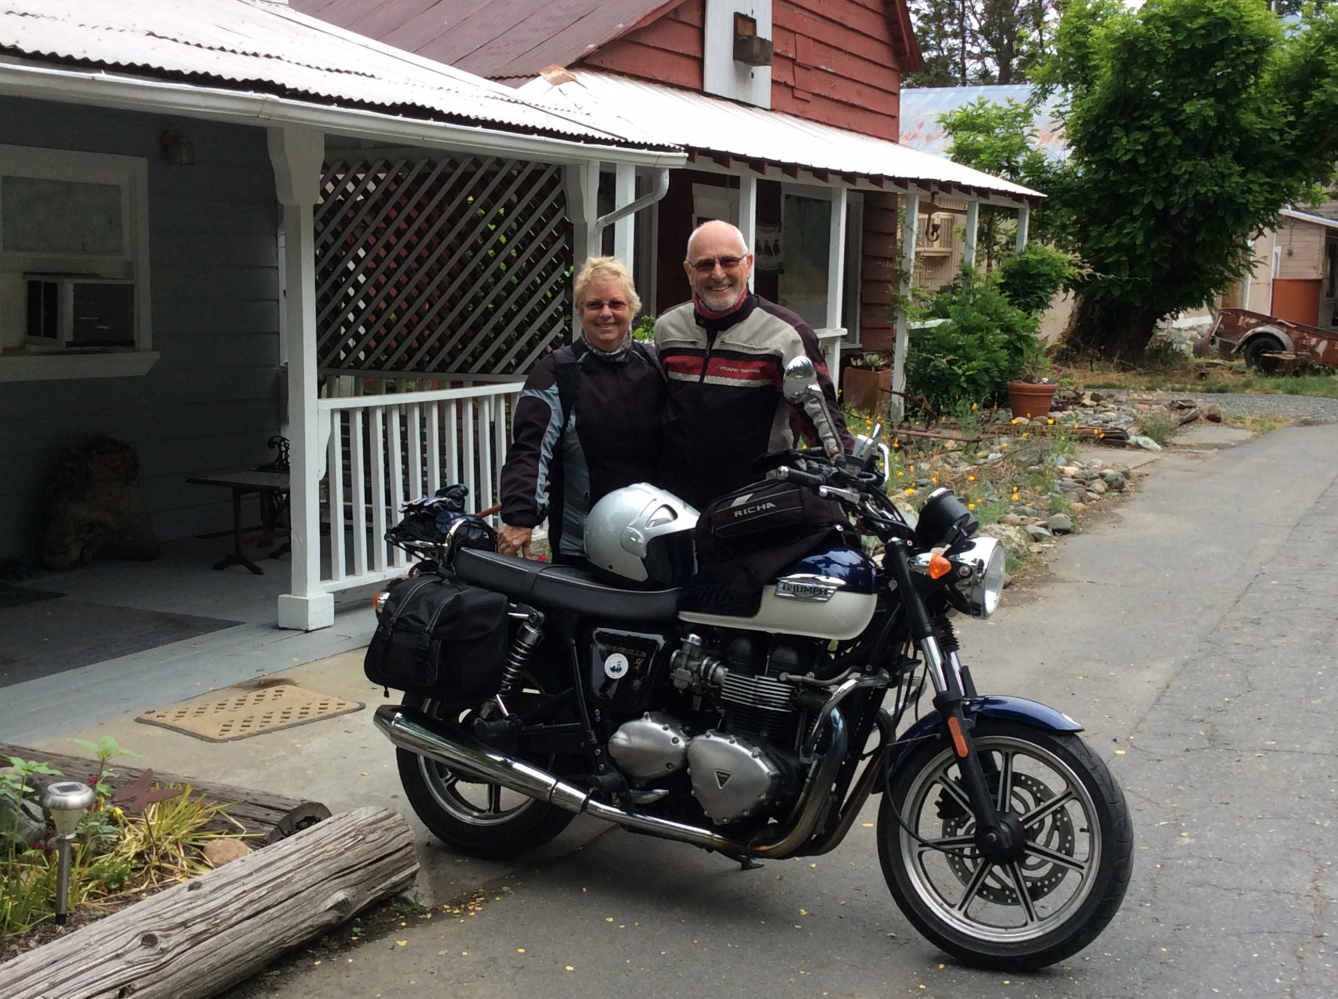 Our motorcycle touring guests